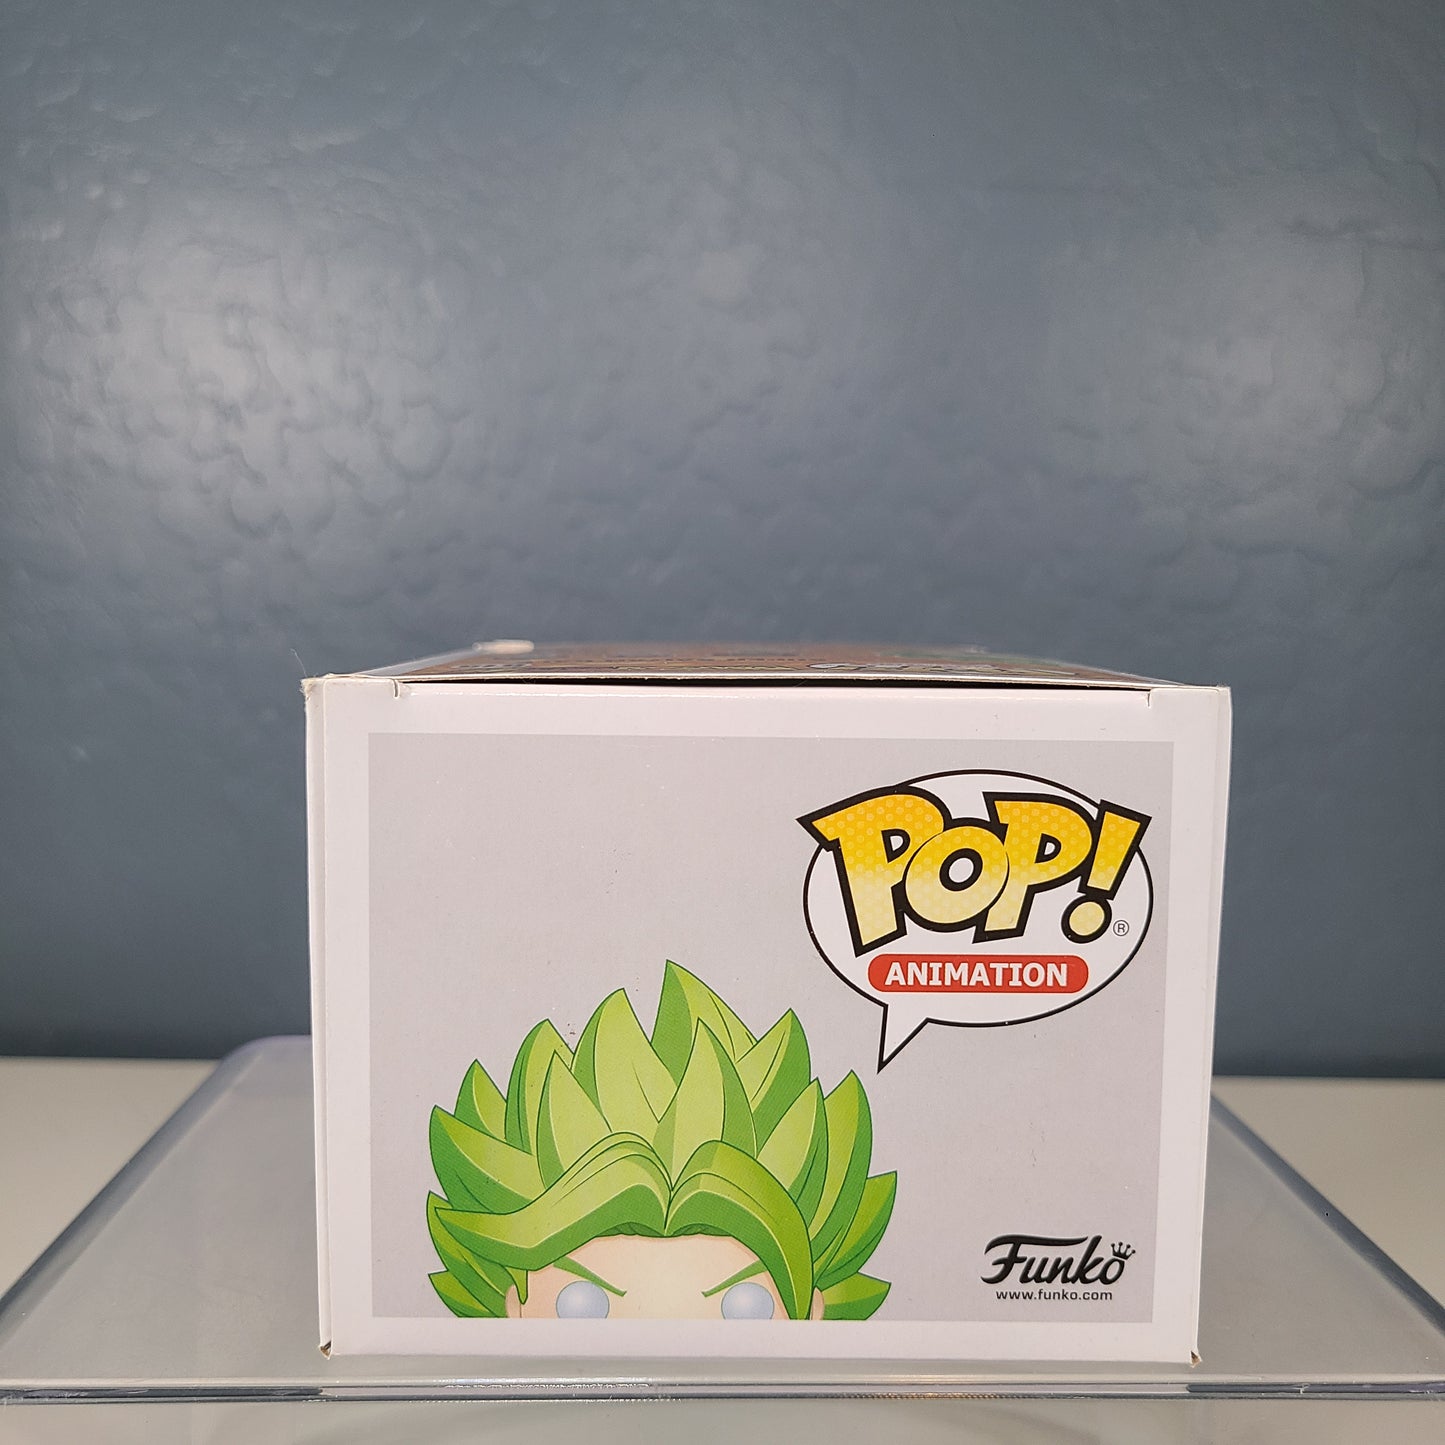 Funko Pop Animation #815- Super Saiyan Kale - Dragonball Super - Box Lunch Exclusive GITD  [7 out of 10]